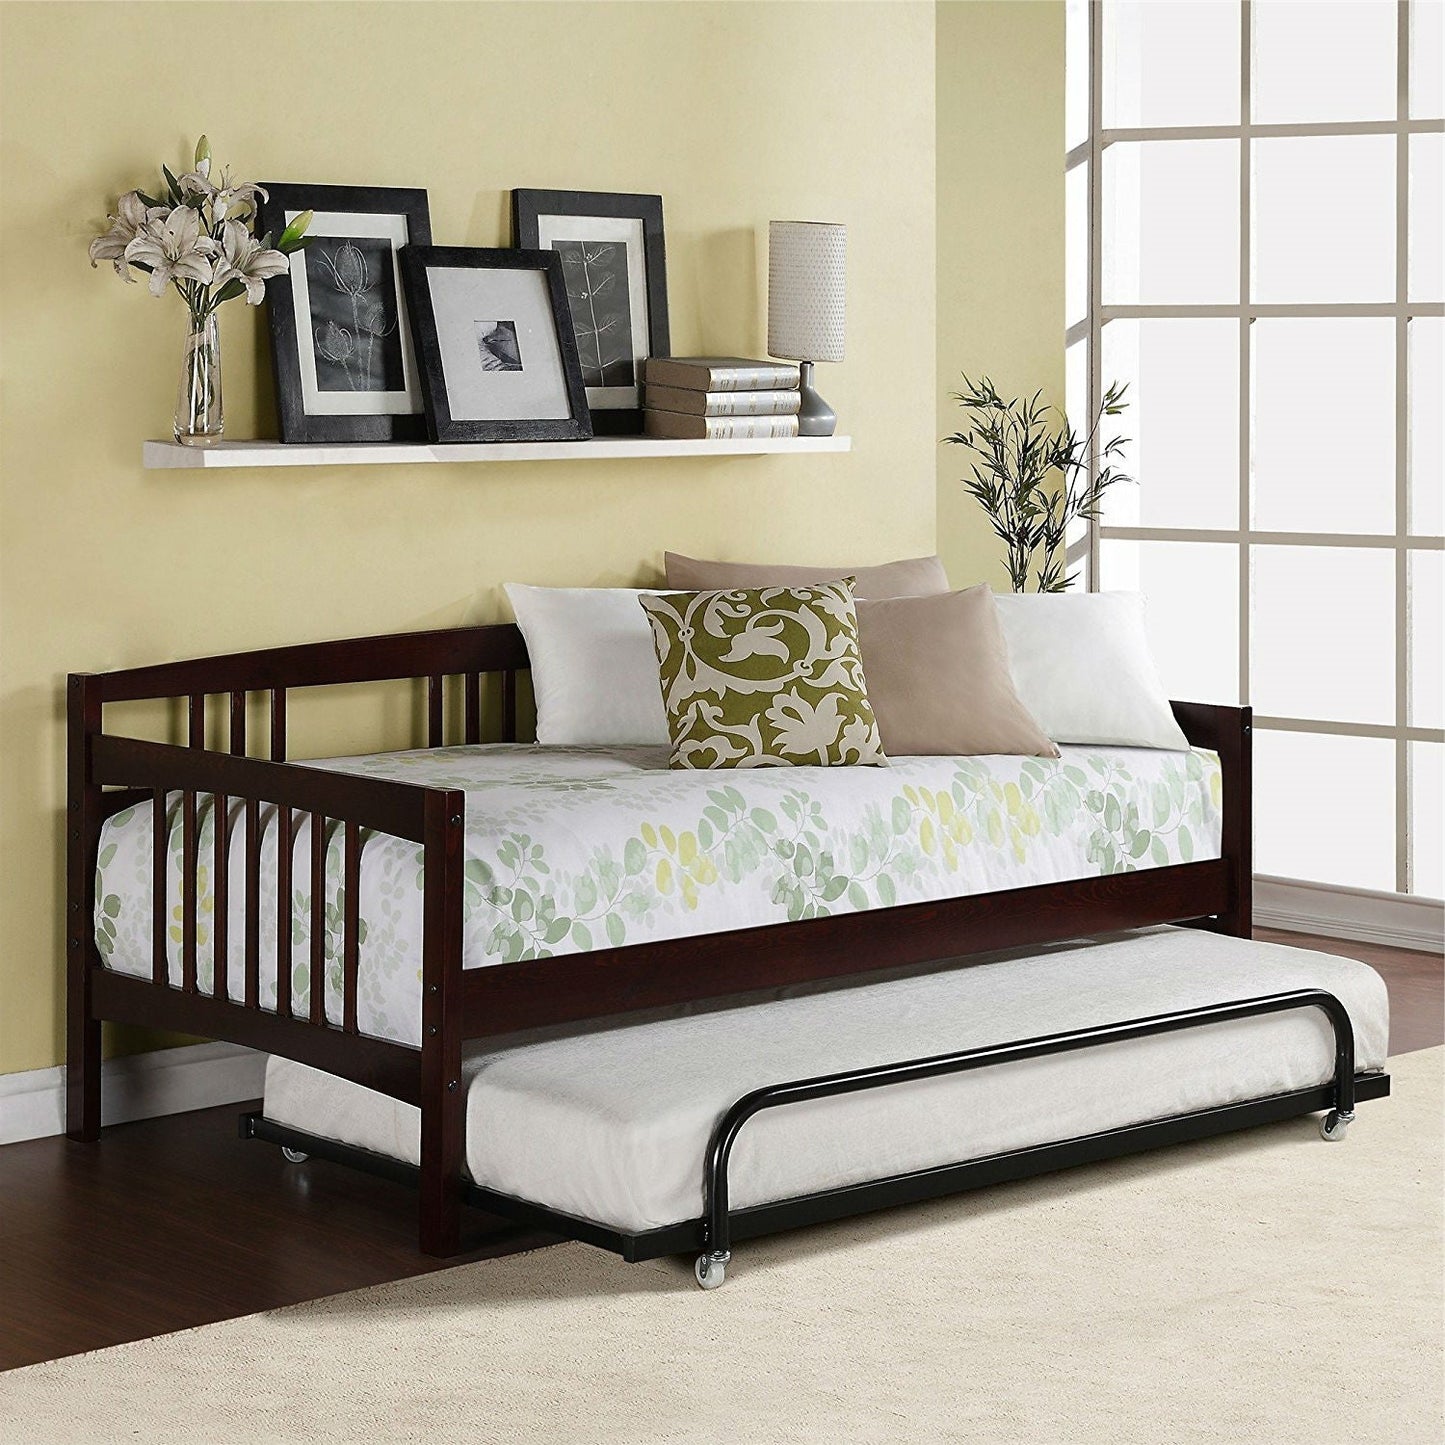 Bedroom > Bed Frames > Daybeds - Twin Size Day Bed In Espresso Wood Finish - Trundle Not Included